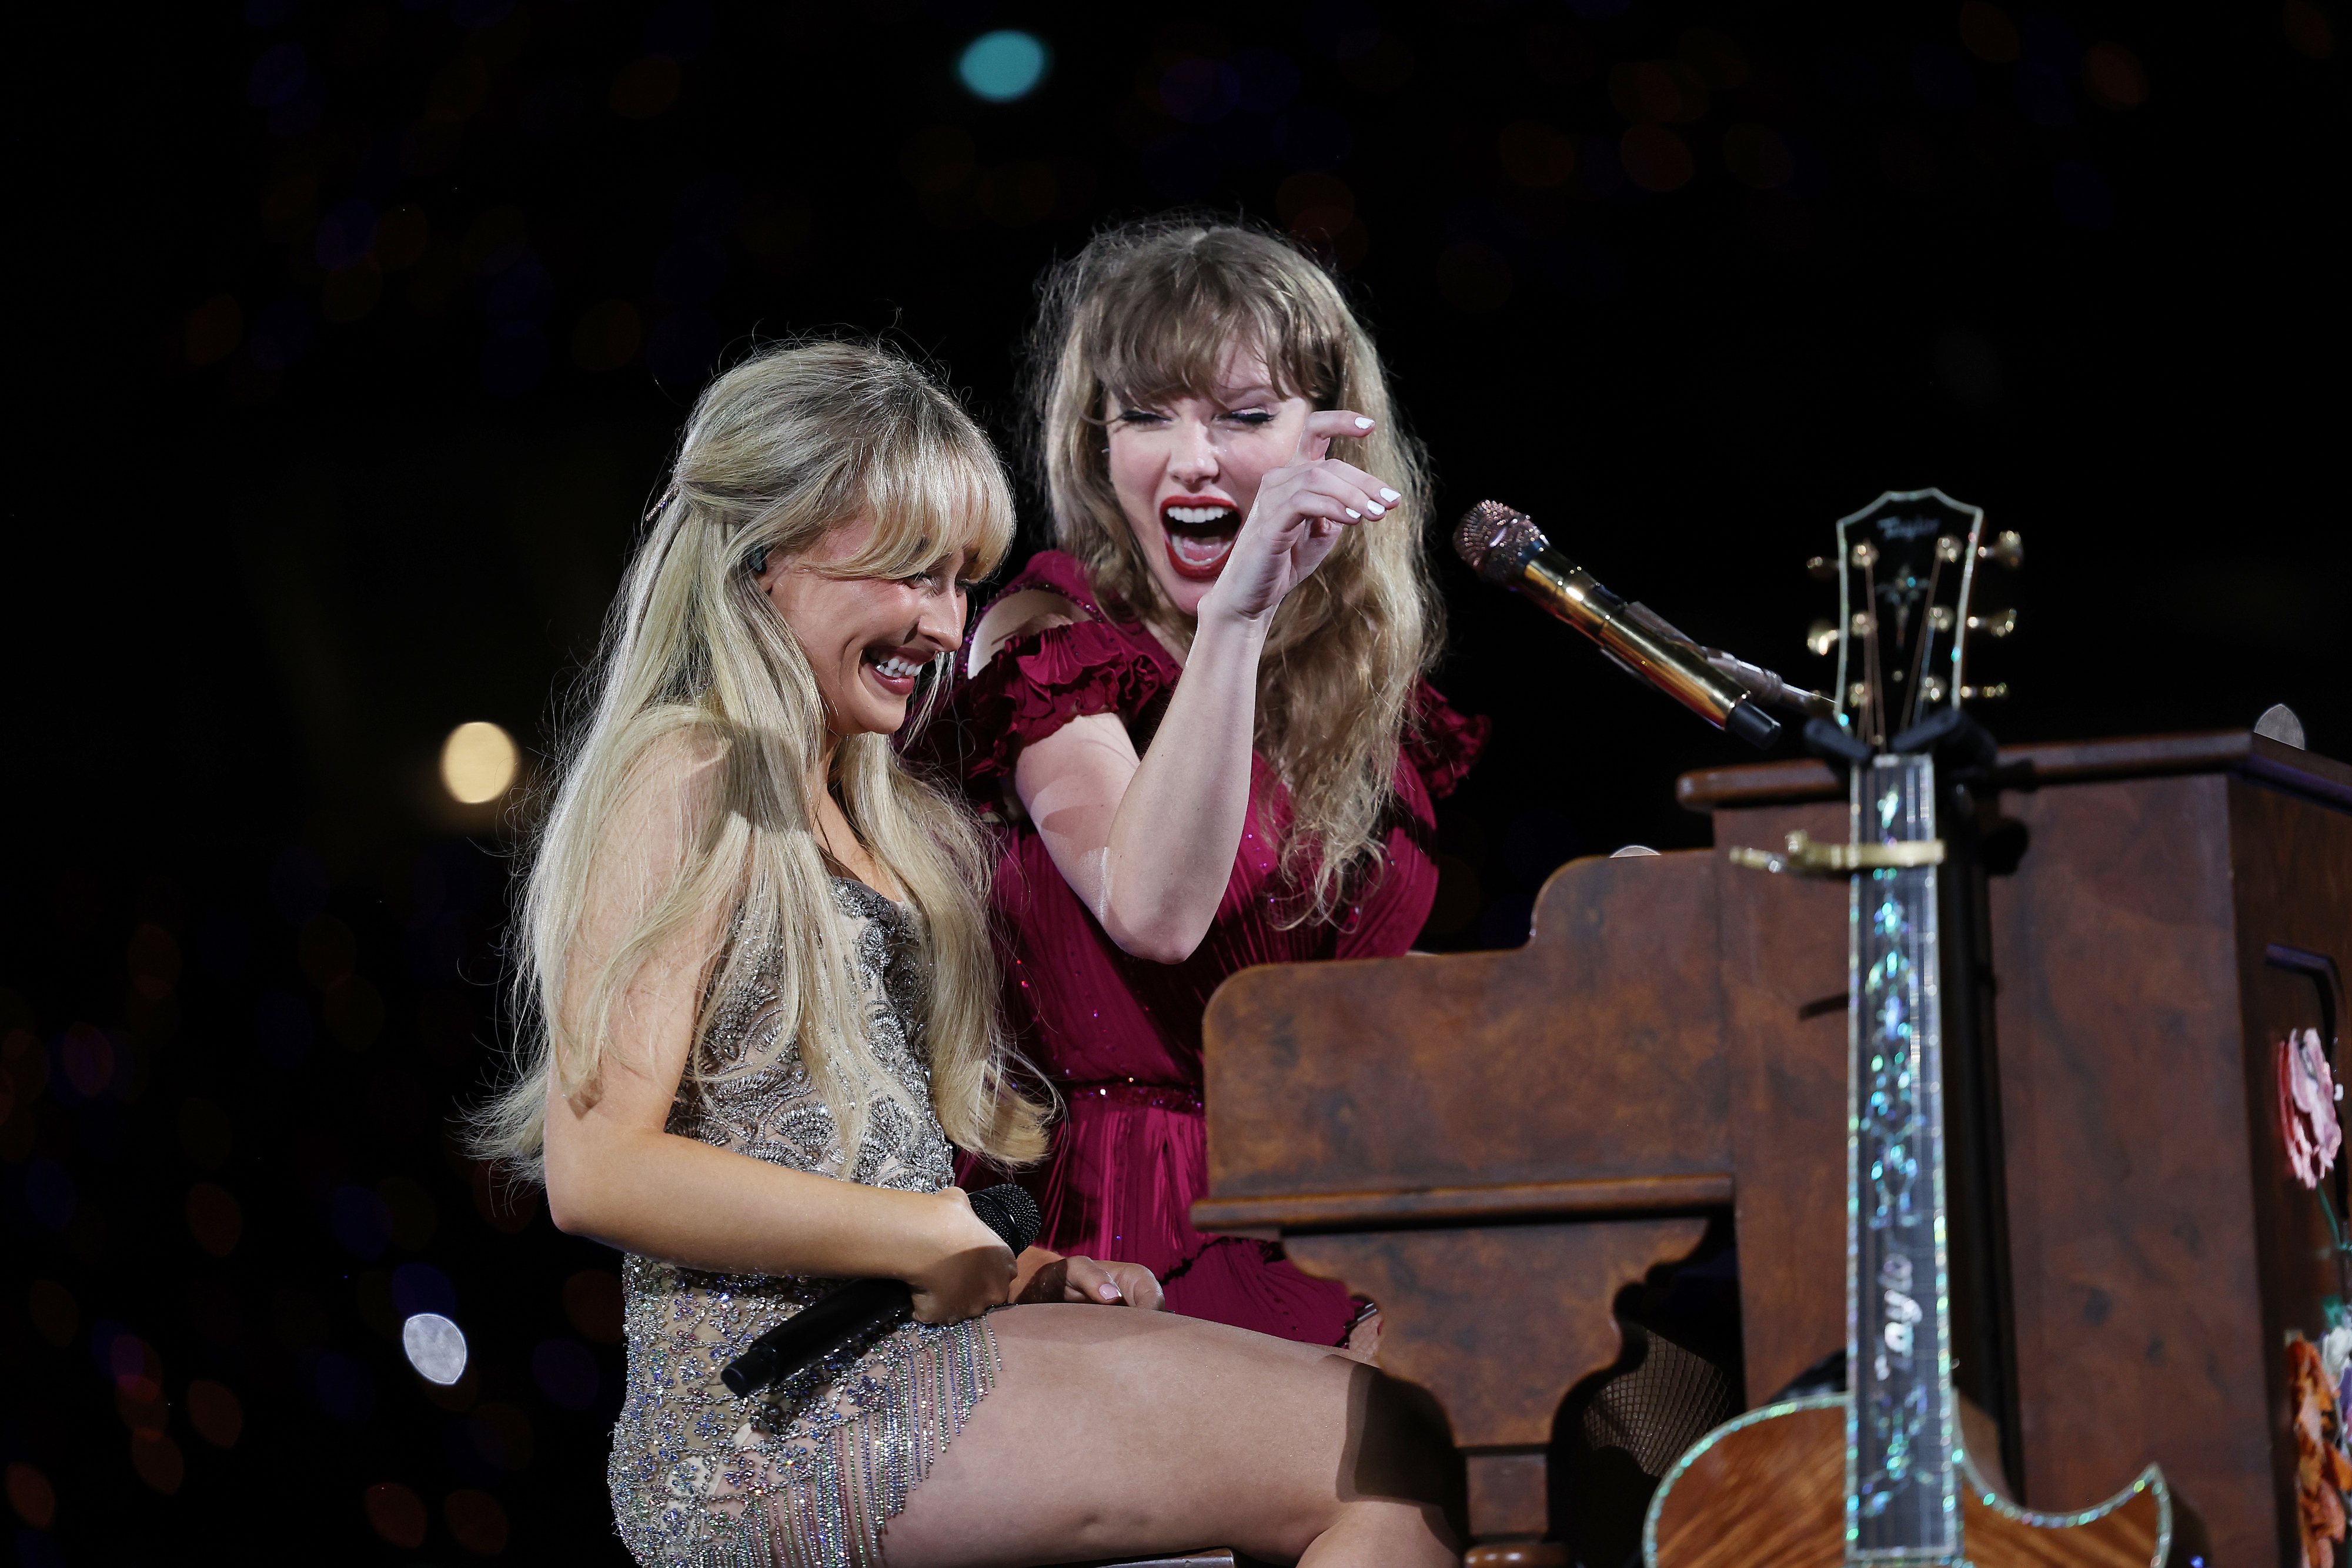 Two women on stage, one seated at a piano, both smiling and appearing to sing